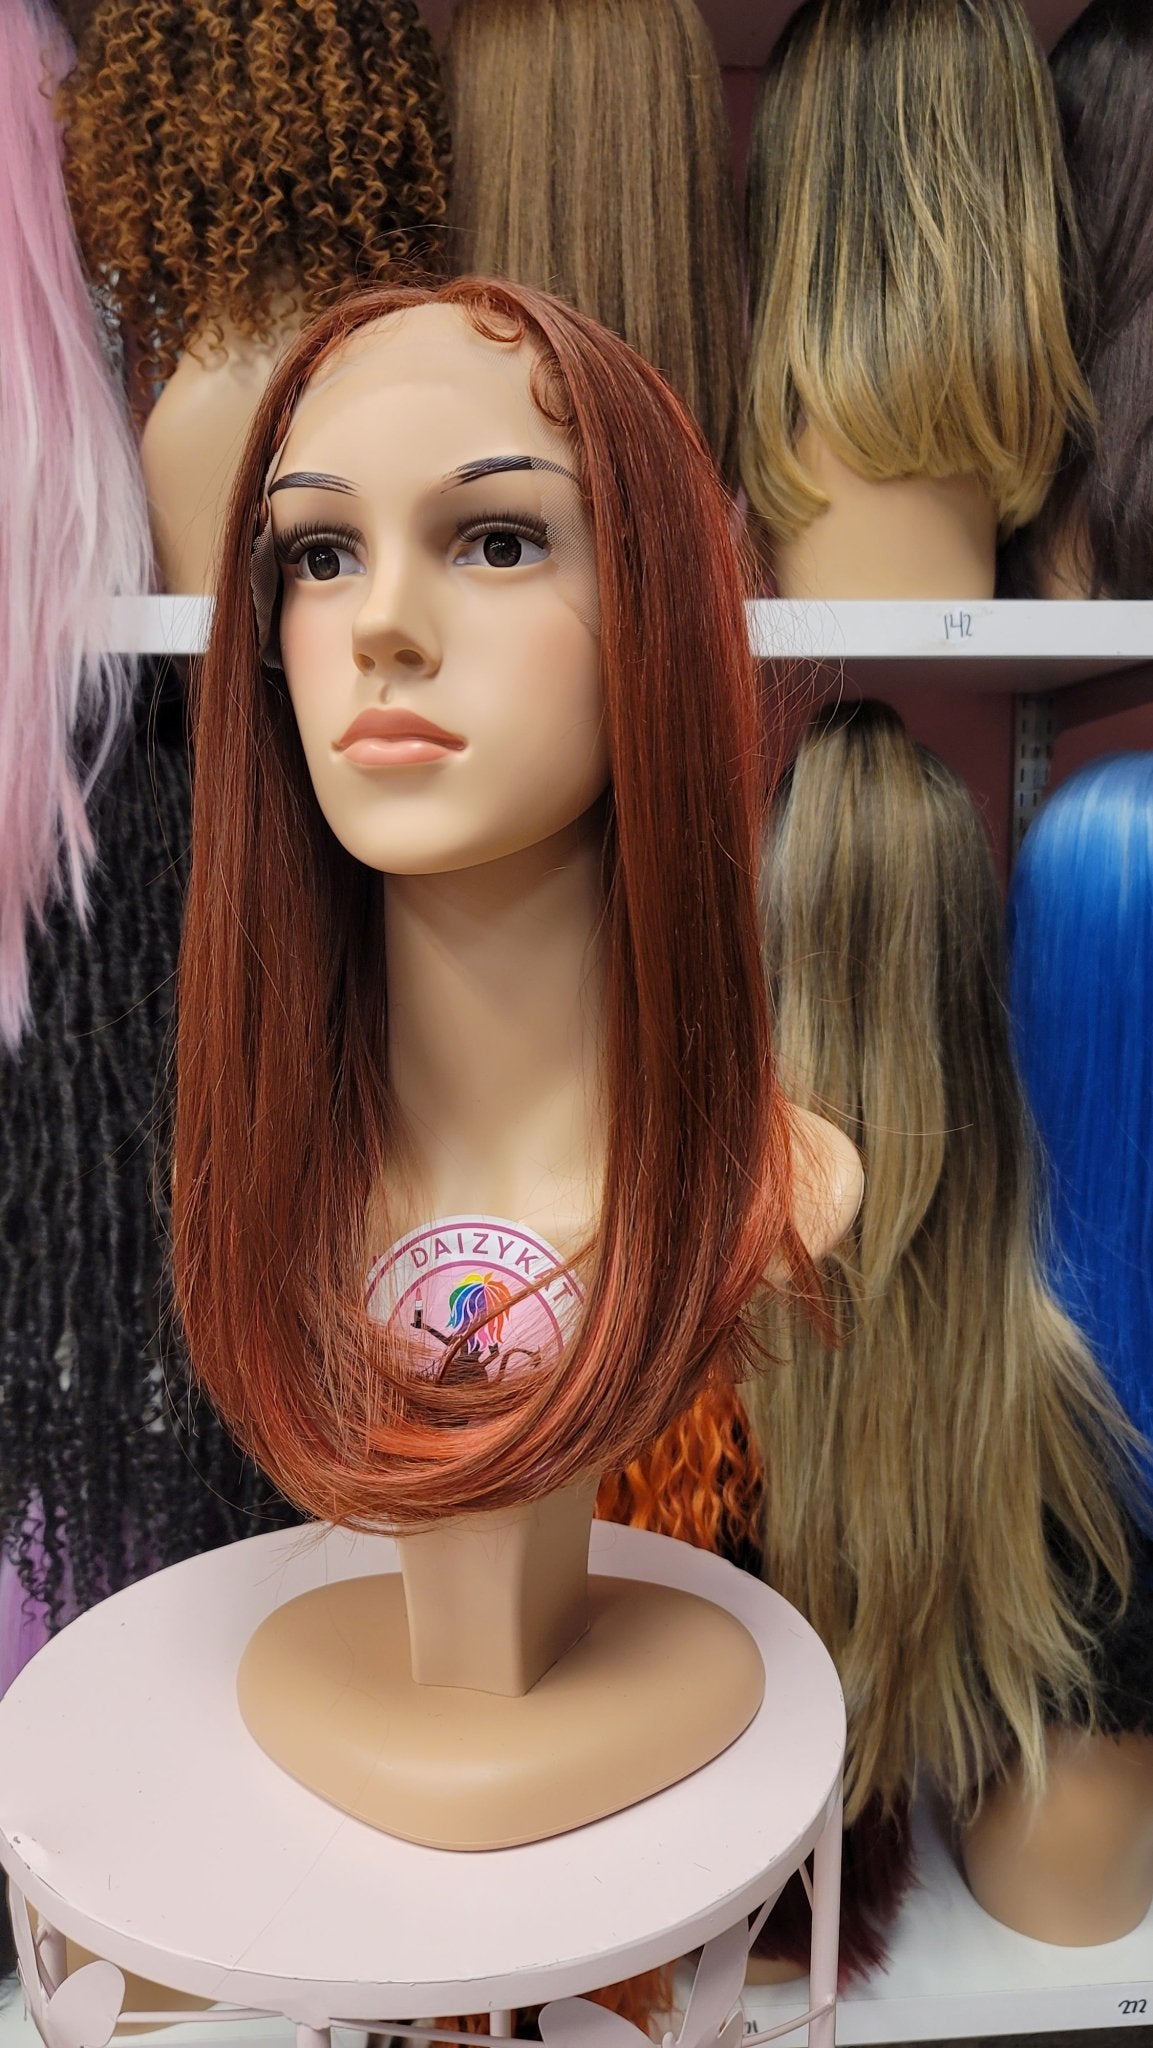 448 JANE - Middle Part Lace Front Wig - STRAWBERRY - DaizyKat Cosmetics 448 JANE - Middle Part Lace Front Wig - STRAWBERRY DaizyKat Cosmetics Wigs